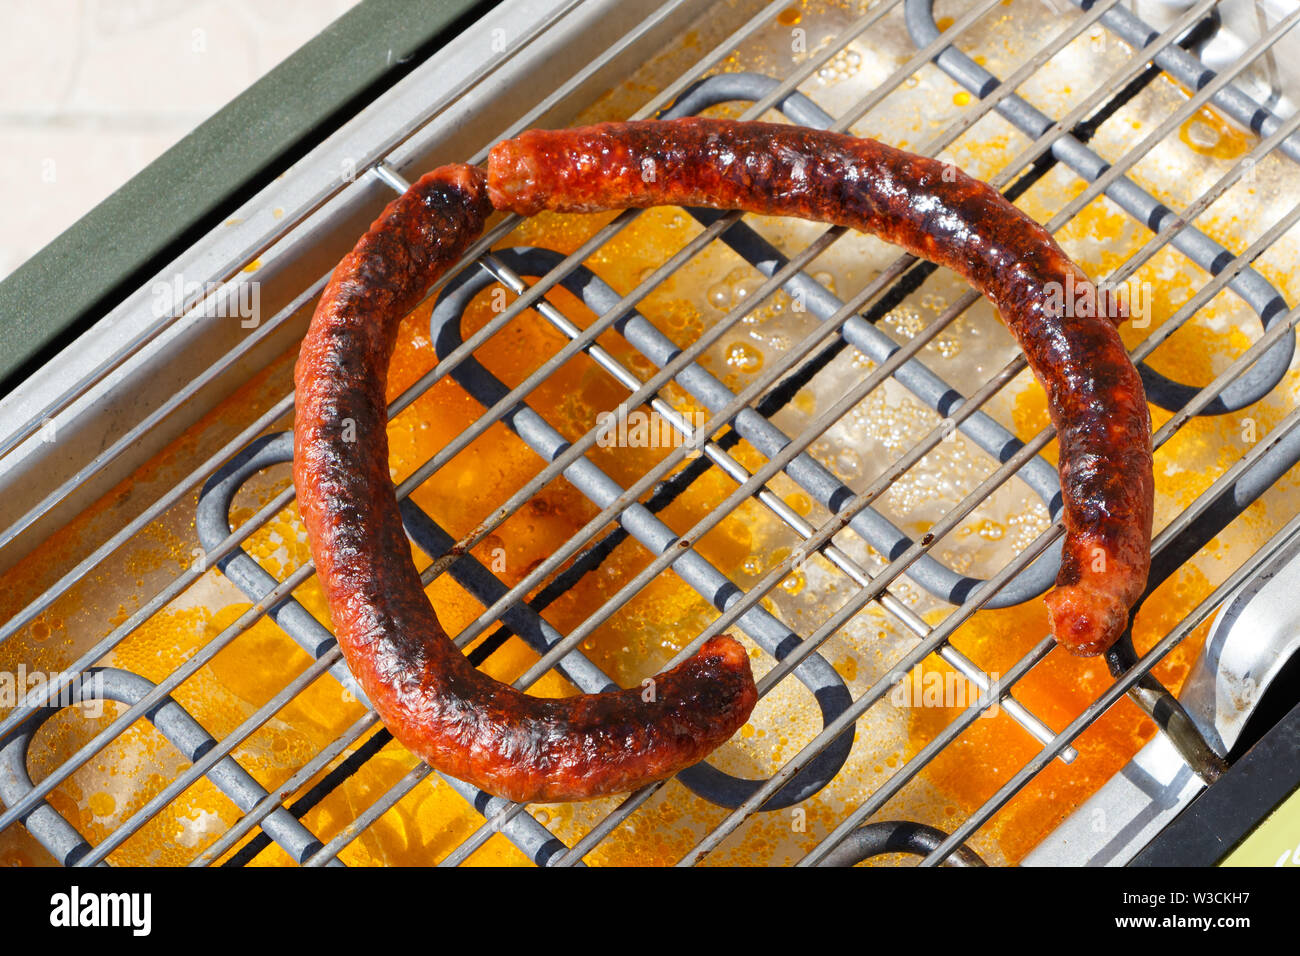 Grilled merguez on the grid of an electric barbecue Stock Photo